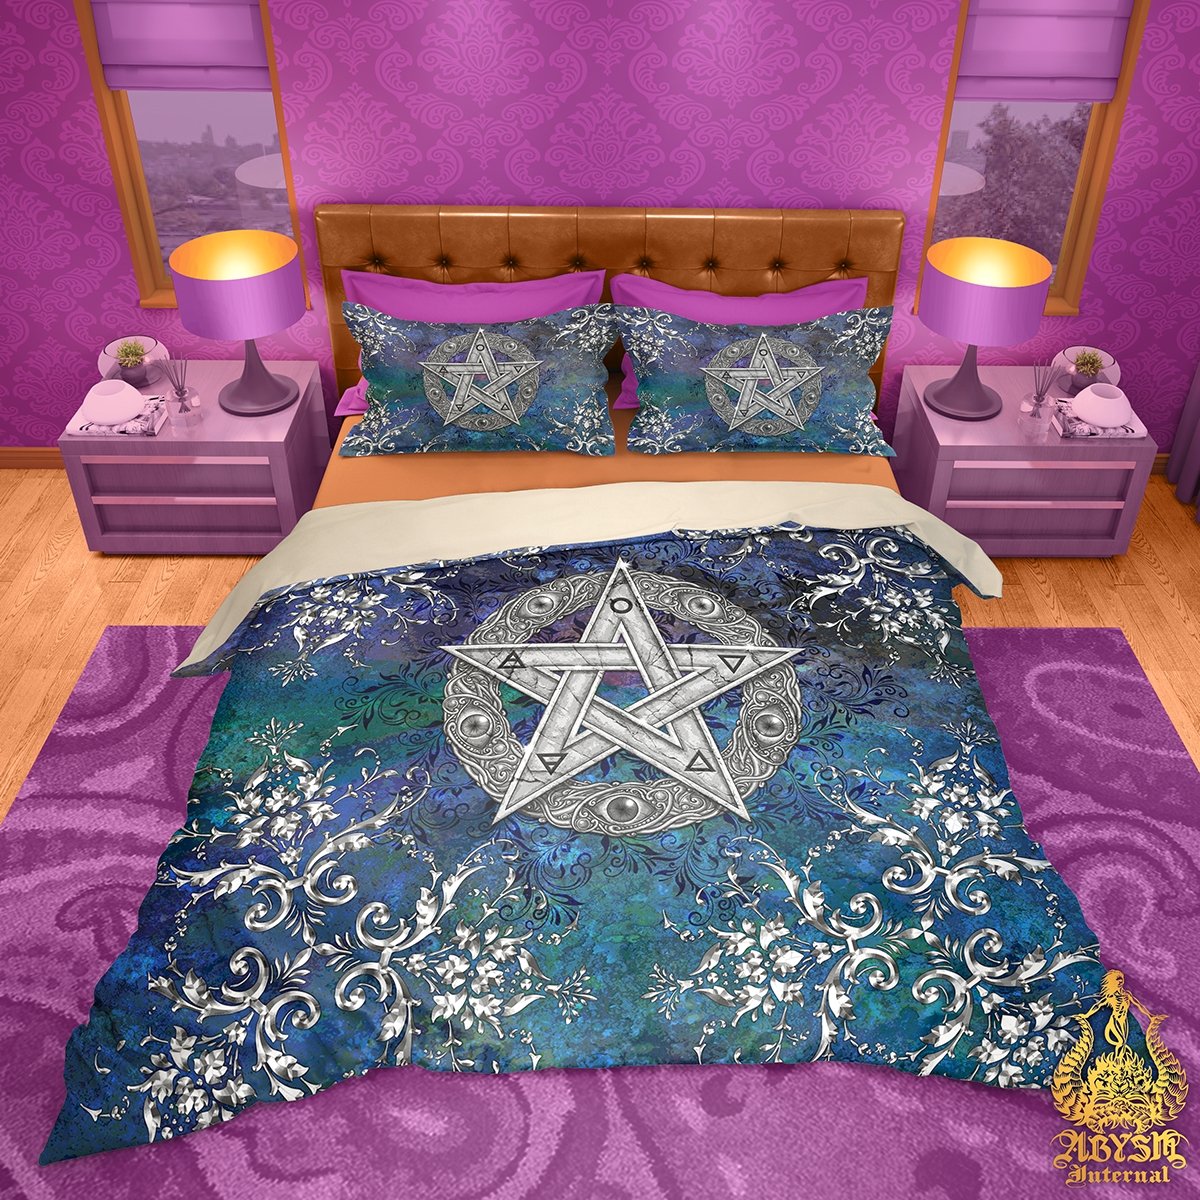 Witchy Bedding Set, Comforter and Duvet, Wiccan Bed Cover and Pagan Bedroom Decor, King, Queen and Twin Size - Silver Pentacle - Abysm Internal